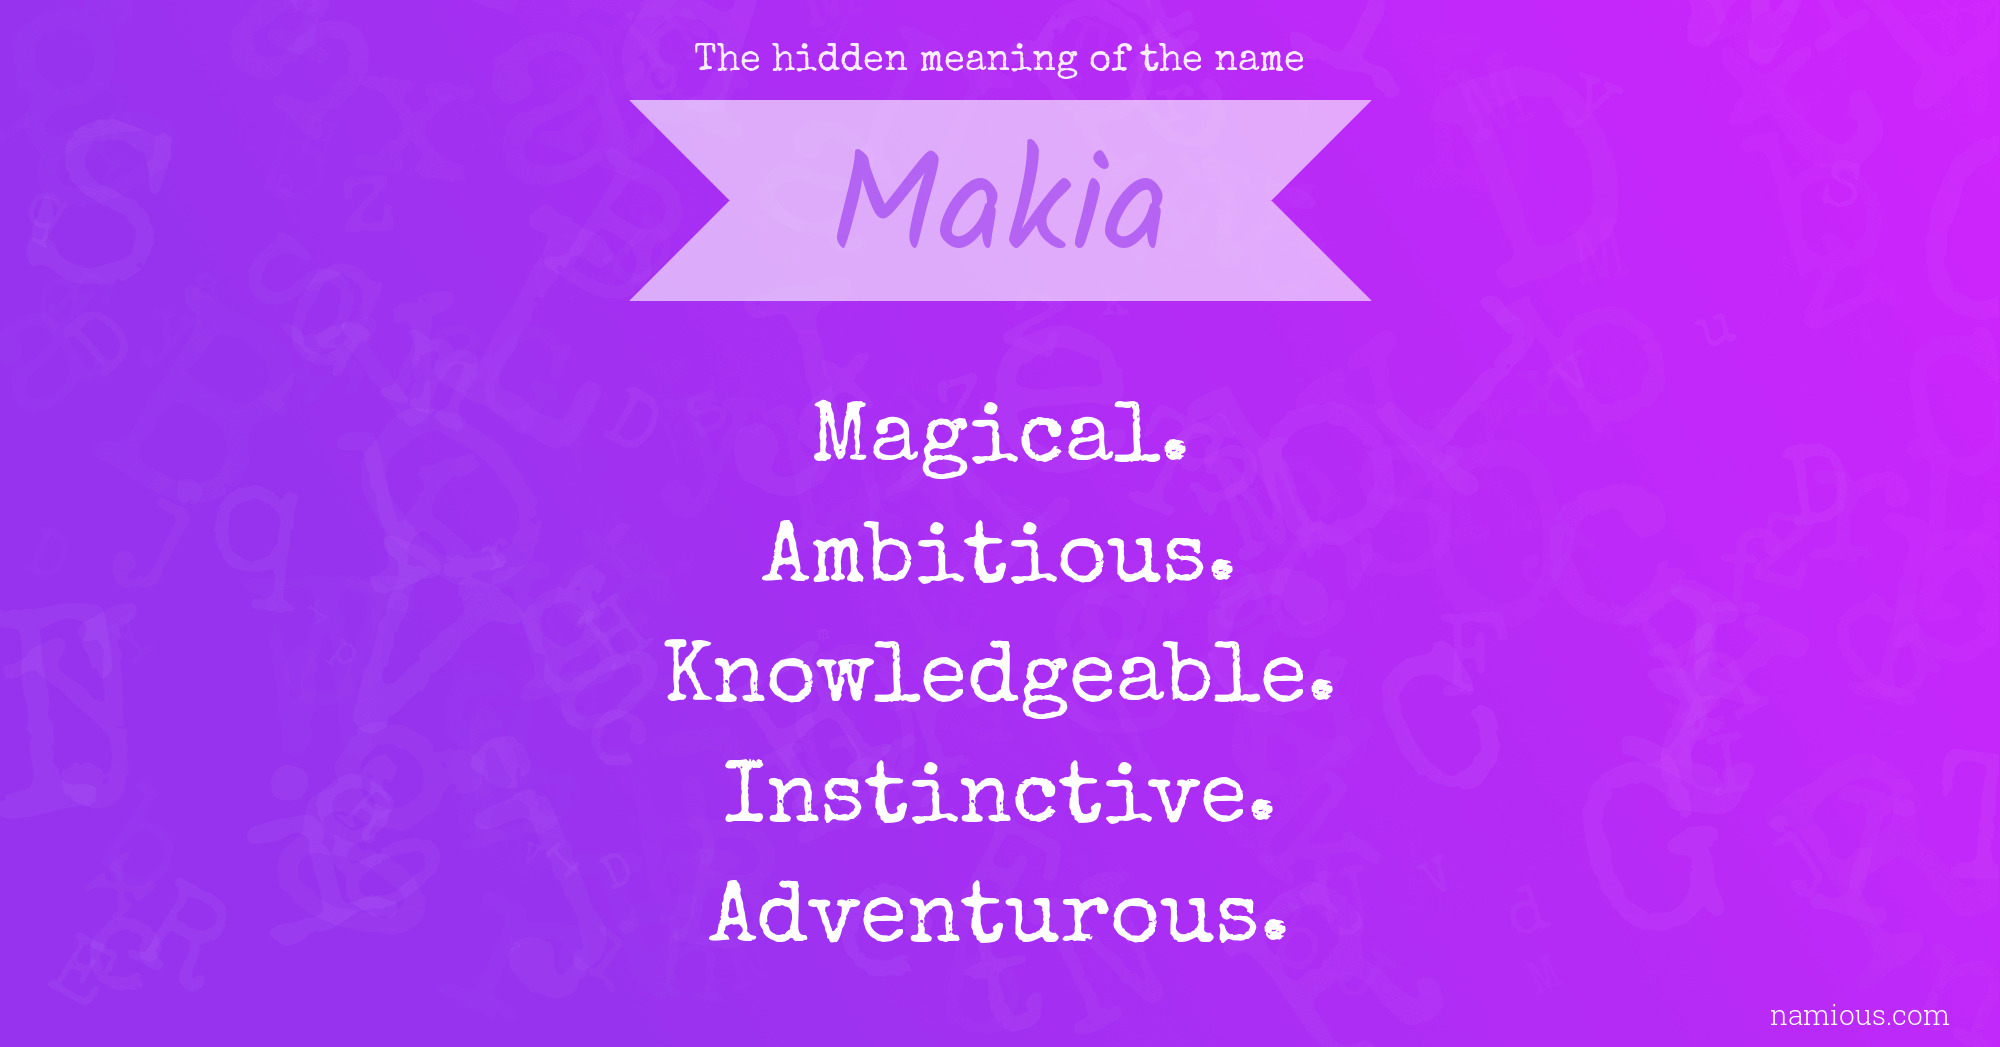 The hidden meaning of the name Makia